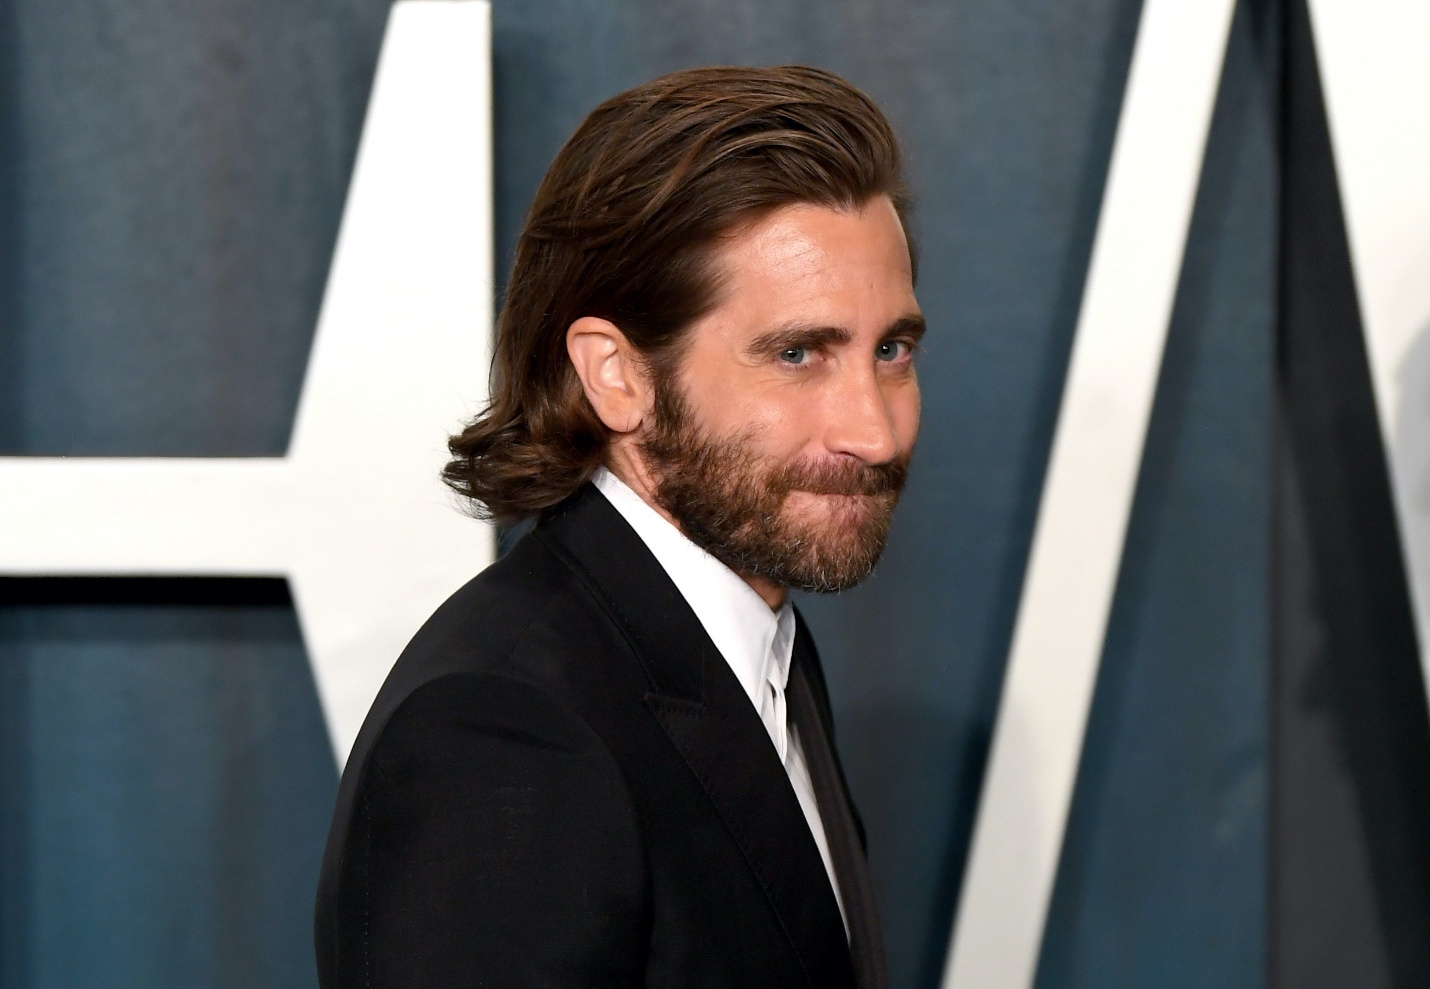 How to style your hair like Jake Gyllenhaal | British GQ